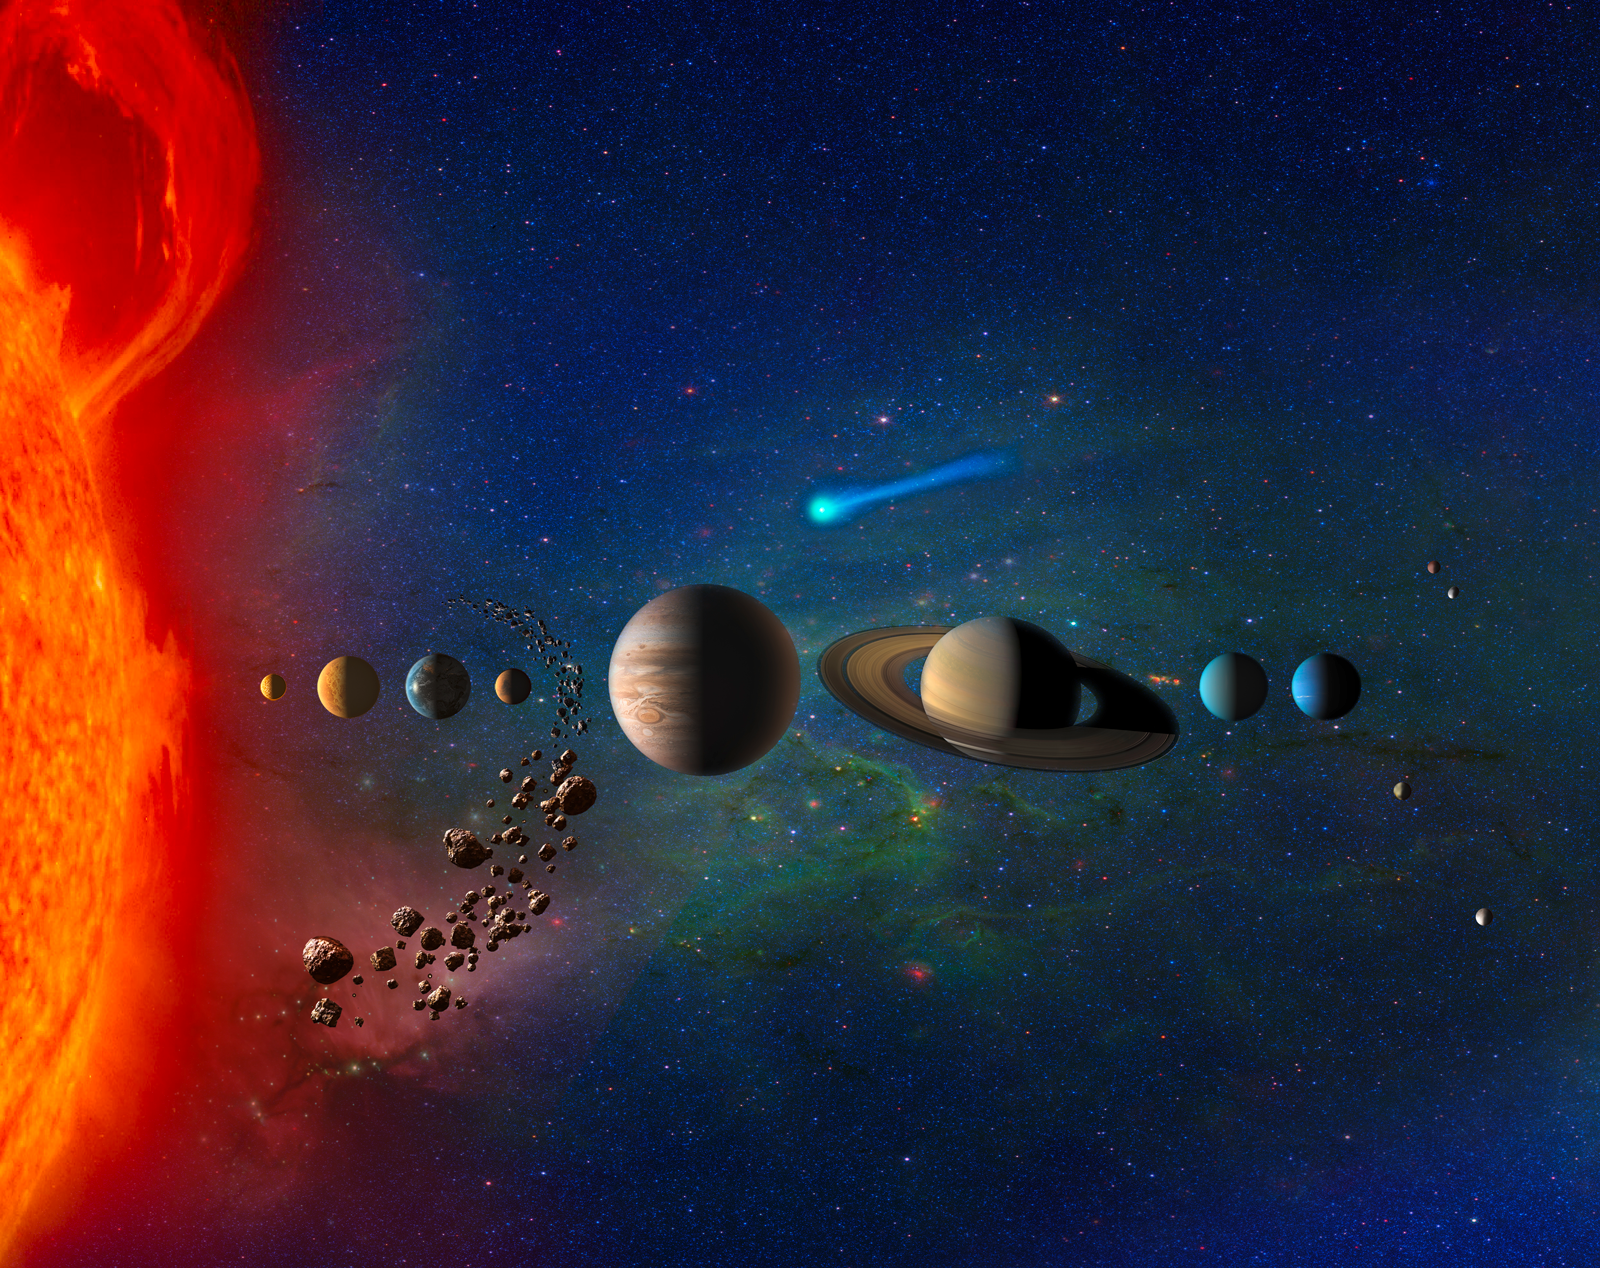 Artist's colorful picture of the objects in our solar system with a fiery partial view of the sun on the left